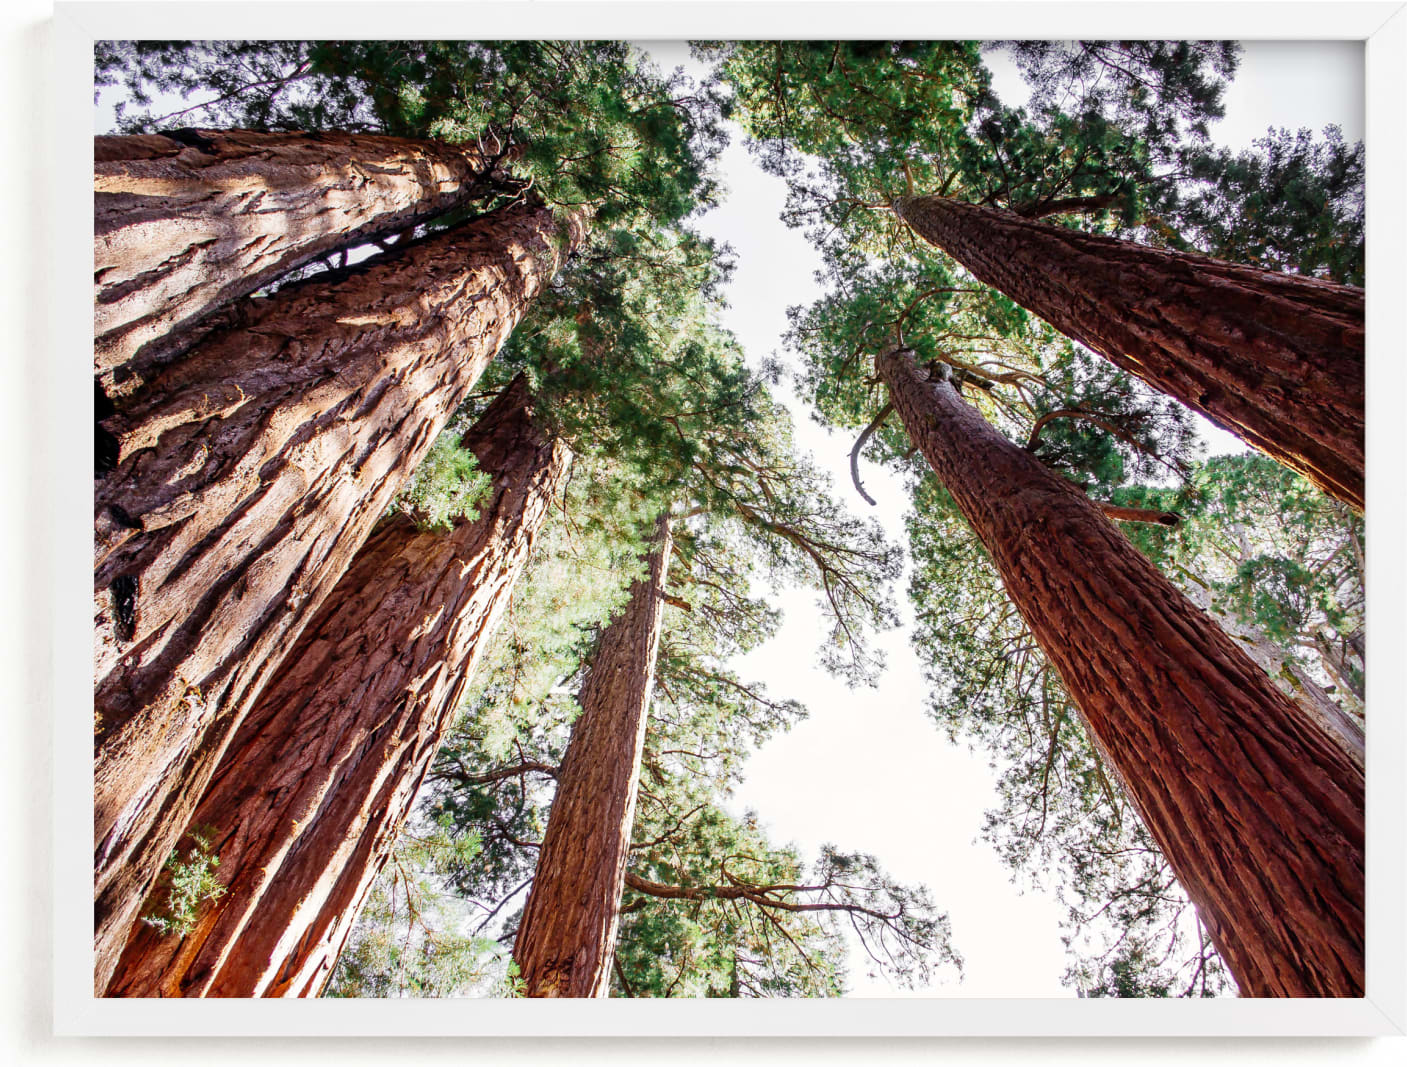 This is a brown art by Matthew Sampson called Soaring Sequoias.